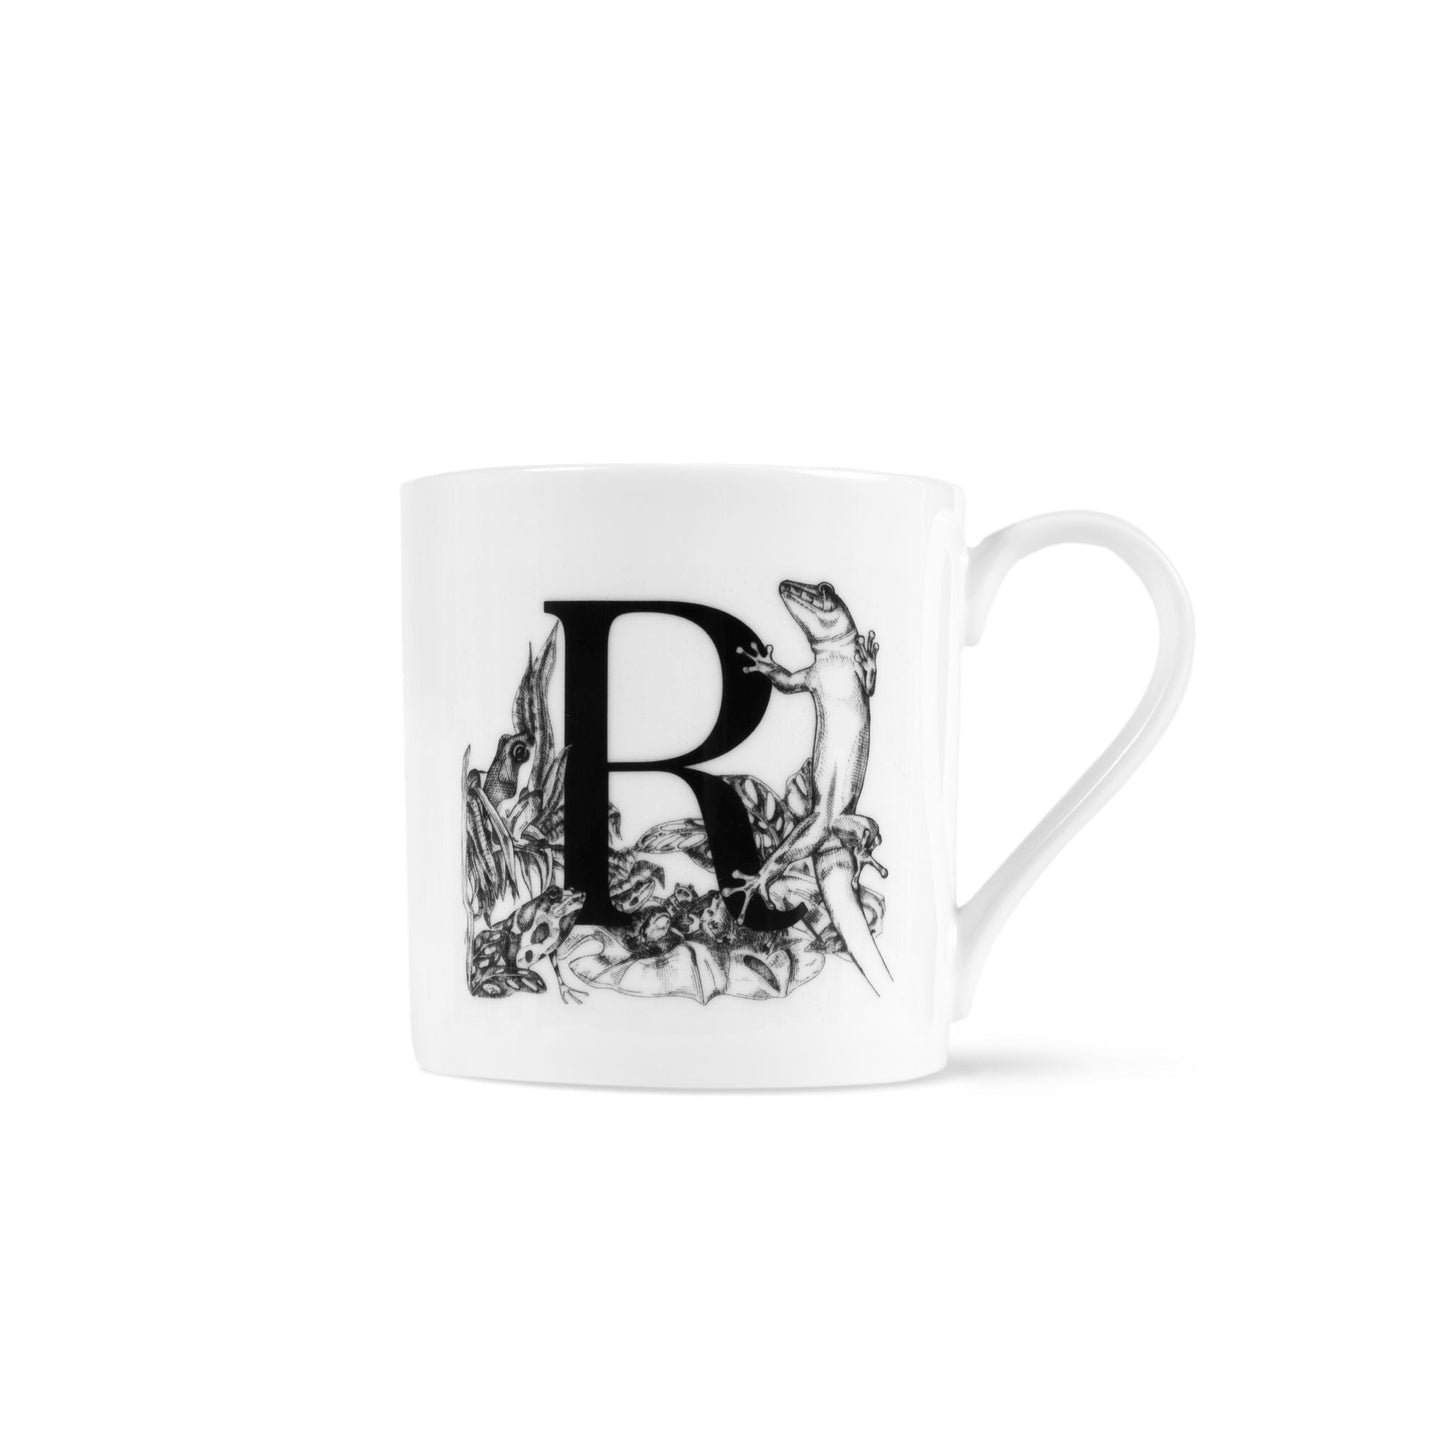 Letter R mug with the simplified tile design with a gecko in the front and frogs to the left and bottom of the R.